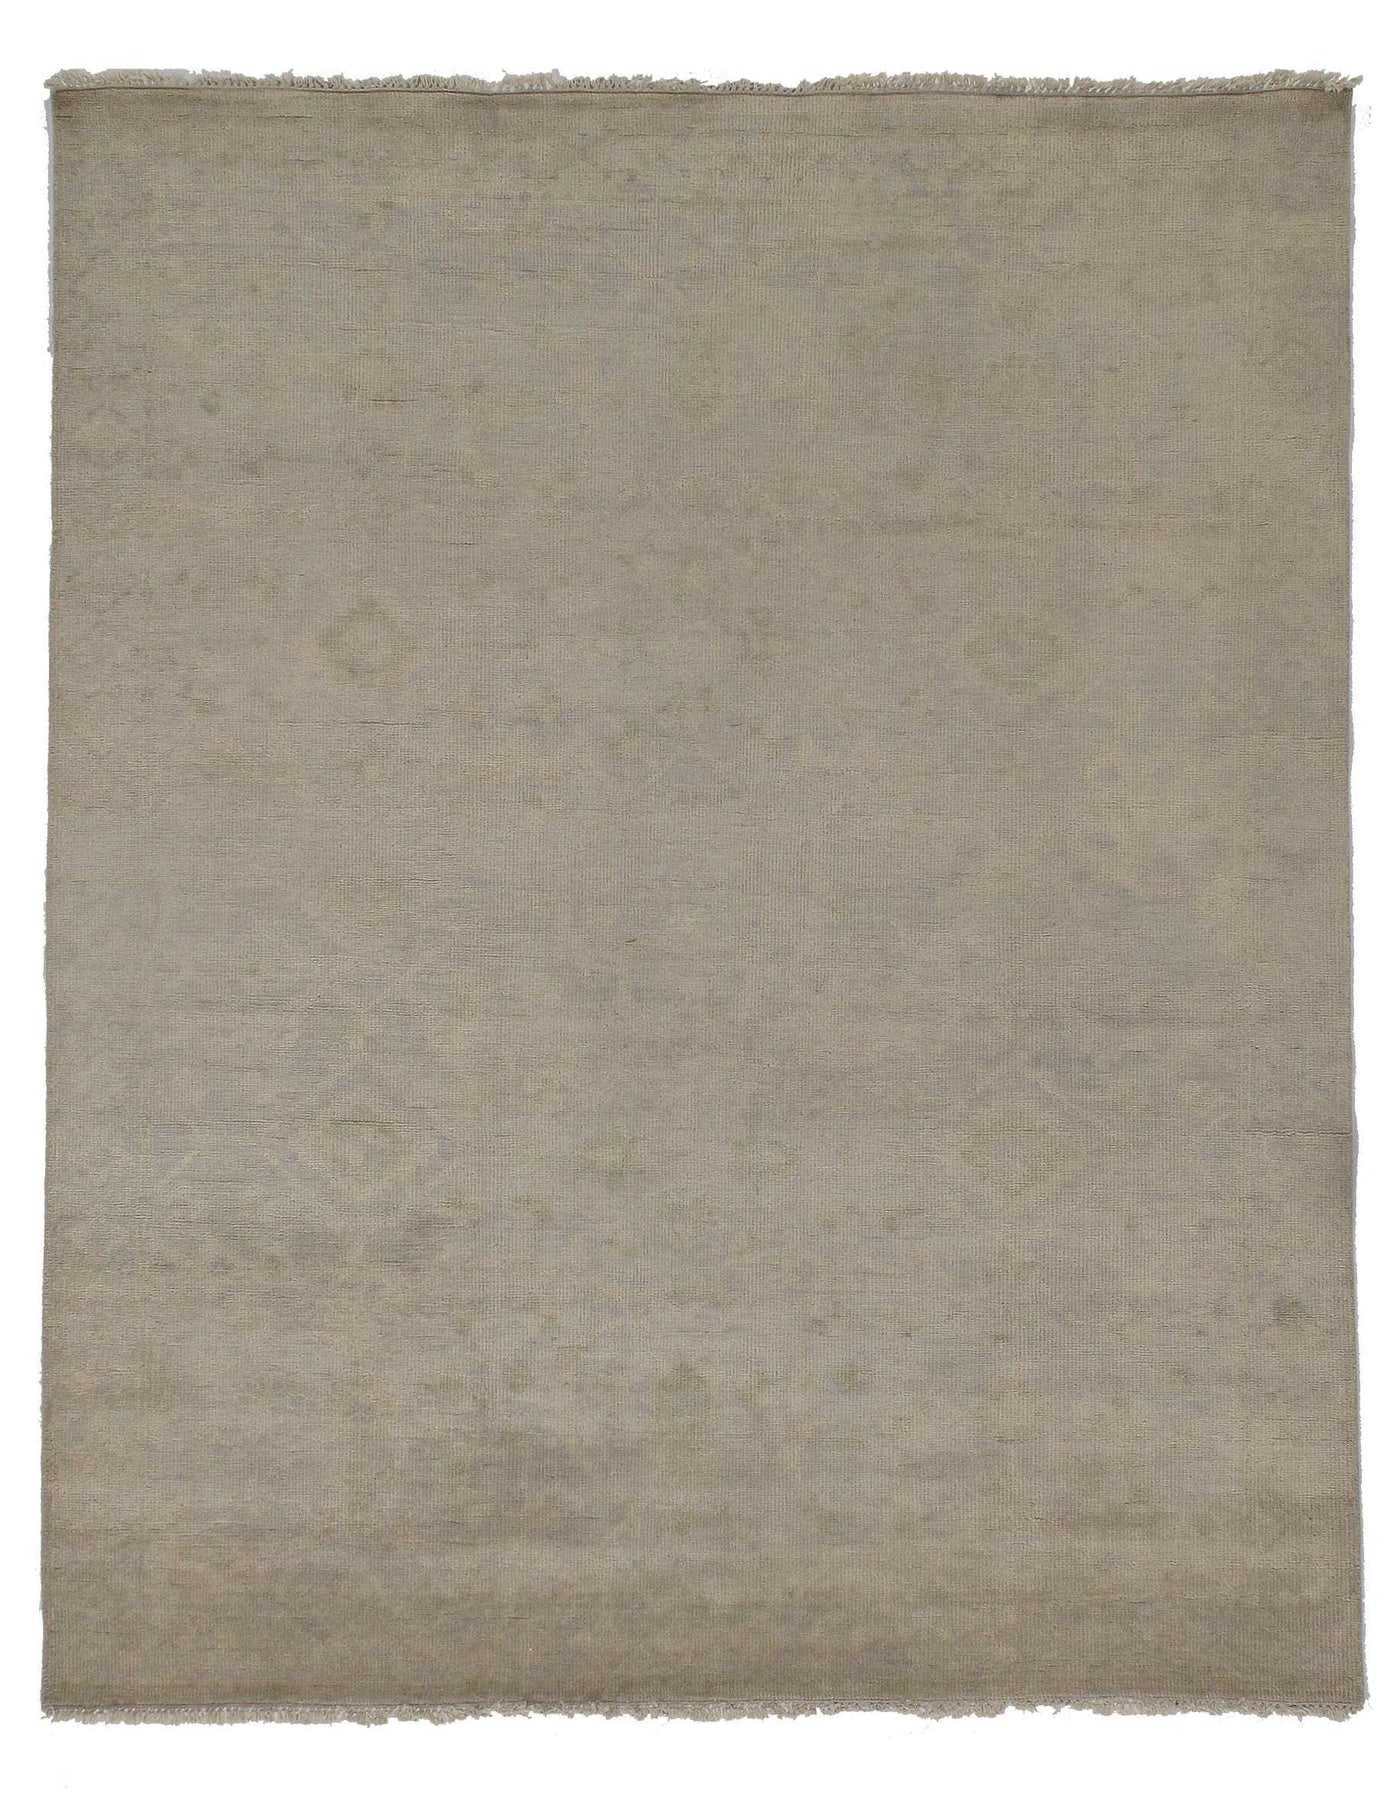 One-of-a-Kind Oushak Hand-Knotted Wool Gray Area Rug 7'9" X 9'9"